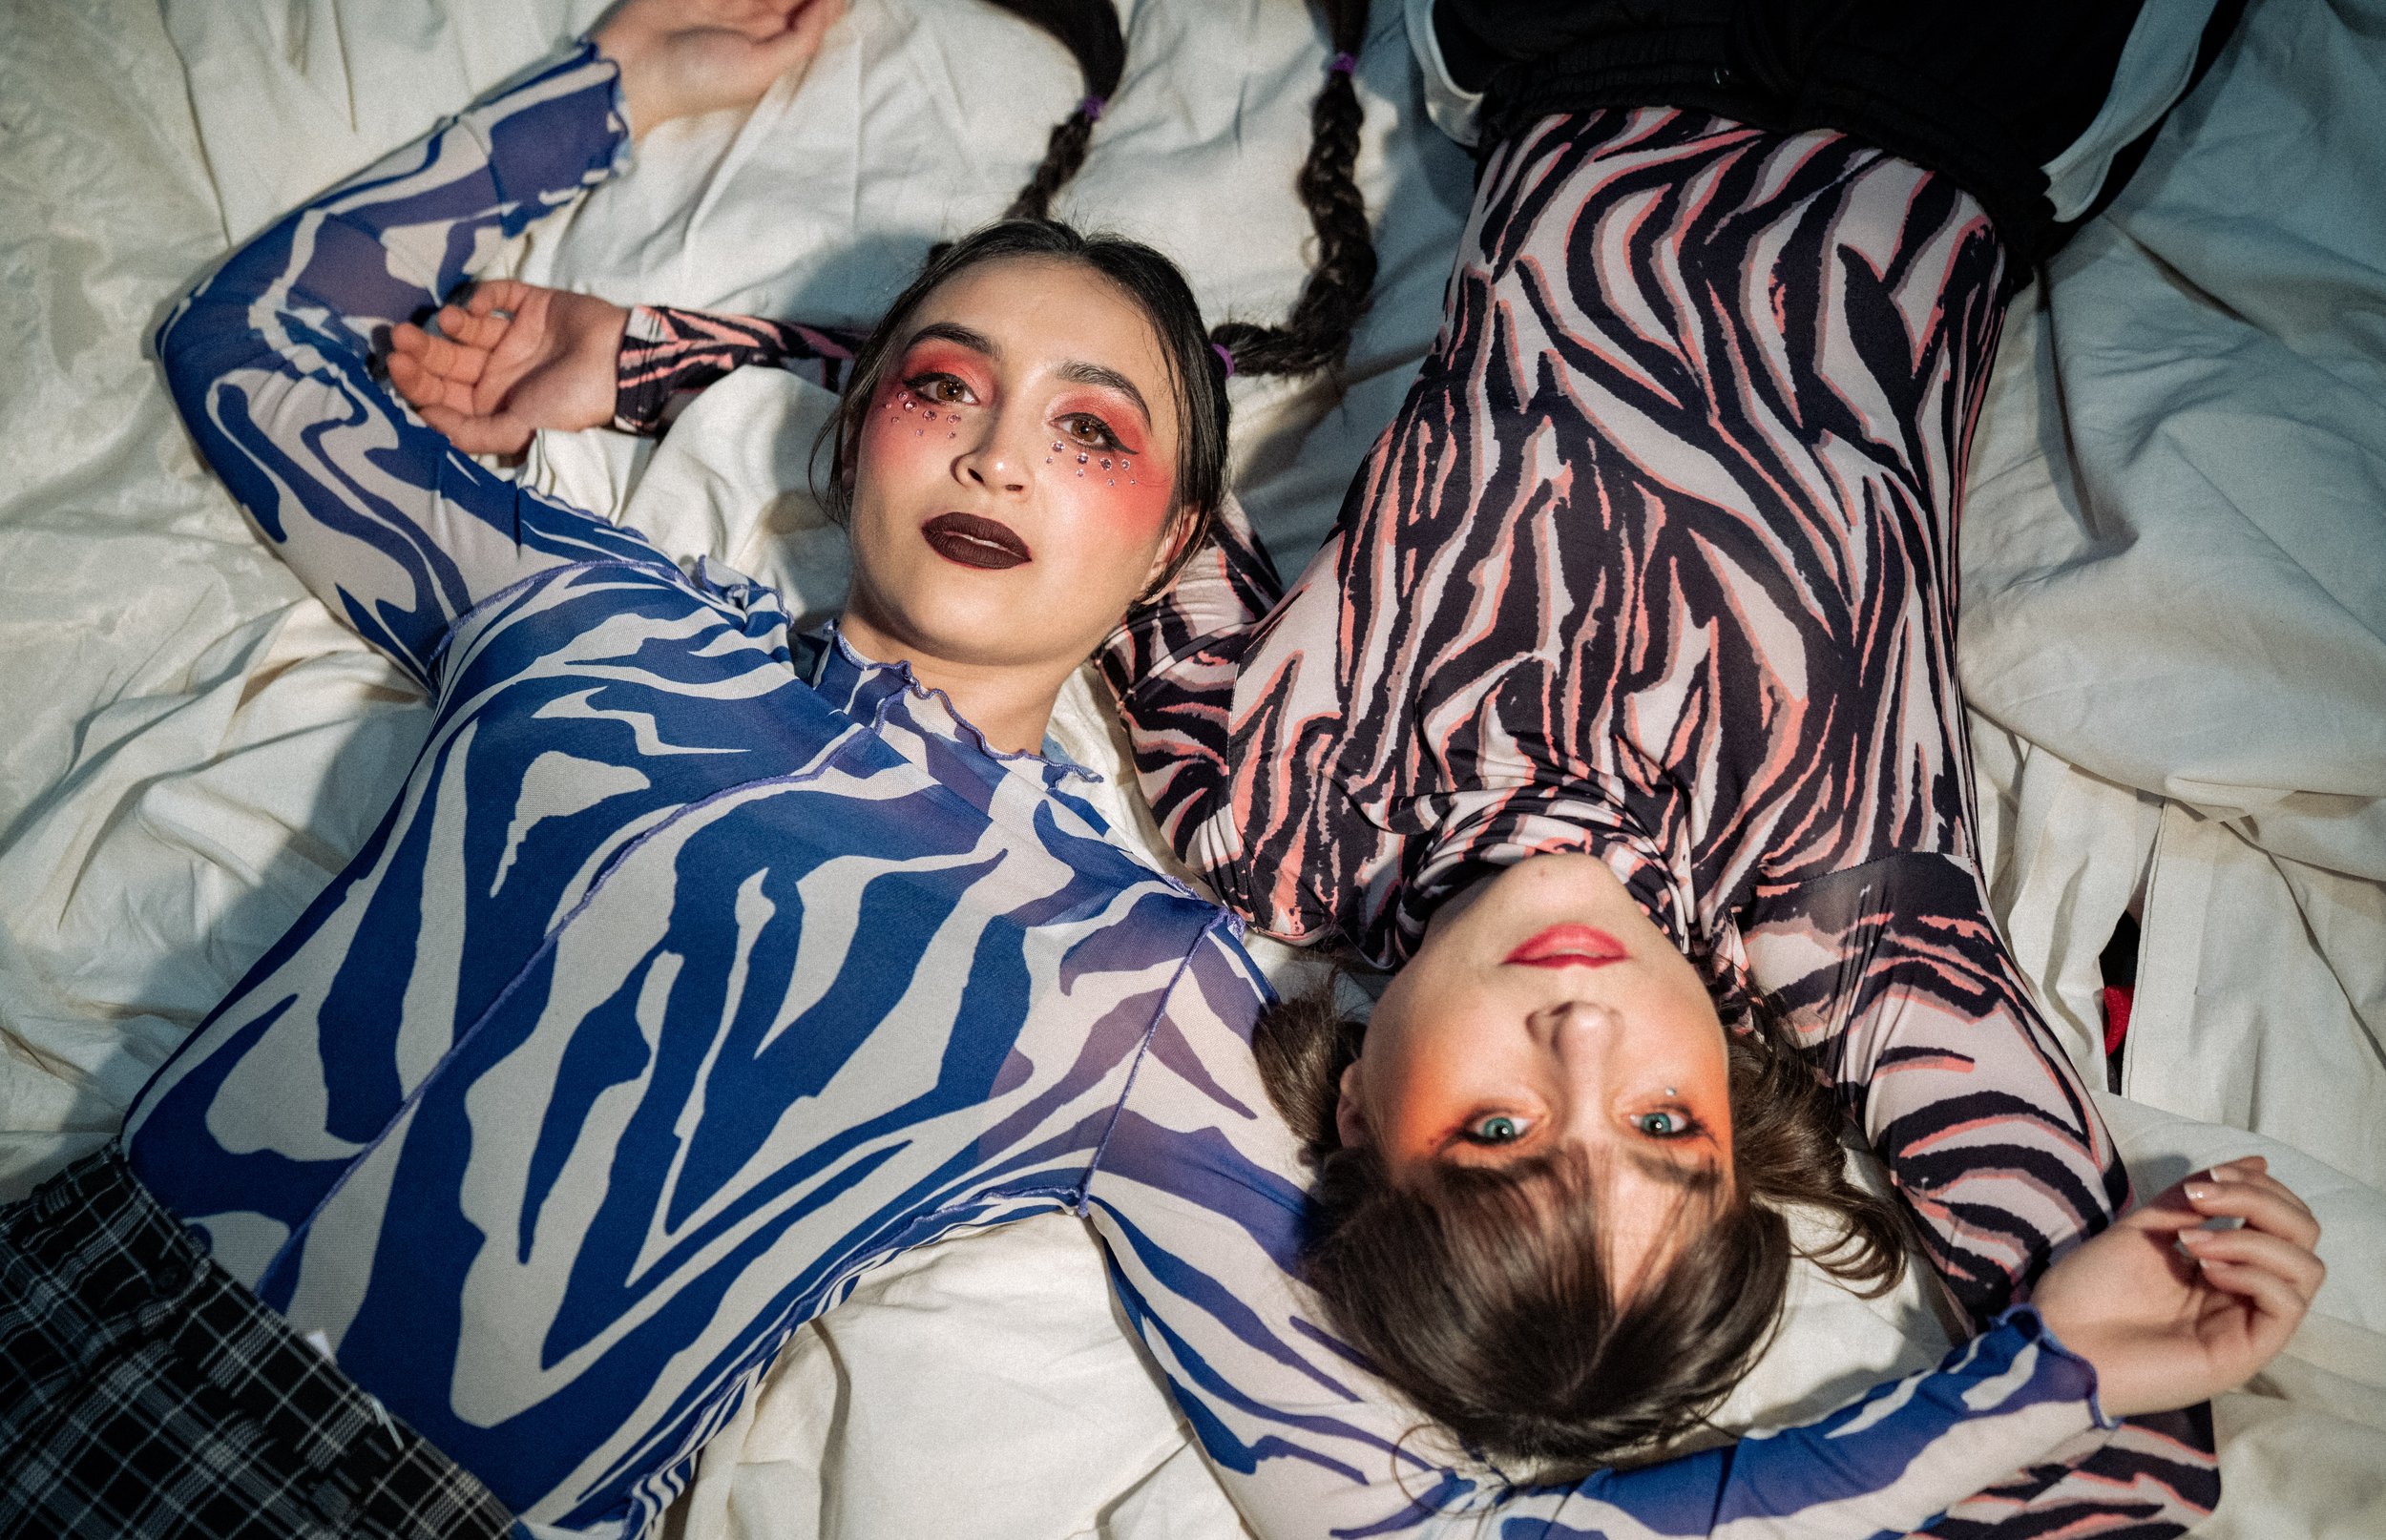  What the Fu** ic Going on? is a devised theatre play for teenagers by New International Encounter, directed by Alex Byrne and Kjell Moberg. It premiered at Brageteatret in Drammen in the spring of 2022. The show is touring Scandinavia and other coun